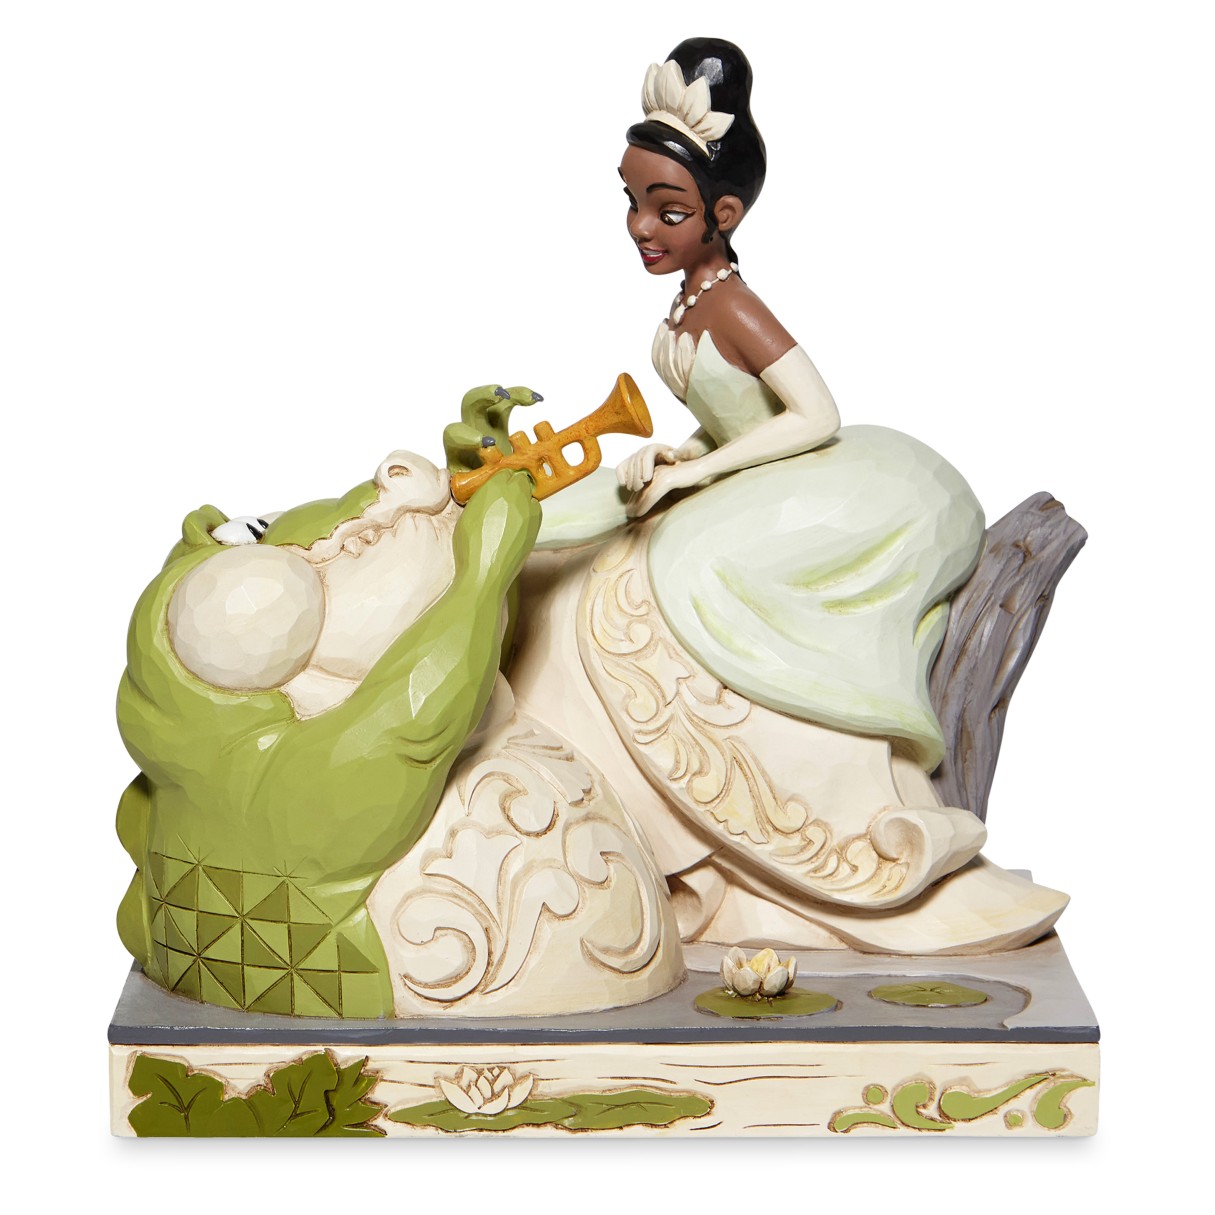 Tiana and Louis White Woodland Figure by Jim Shore – The Princess